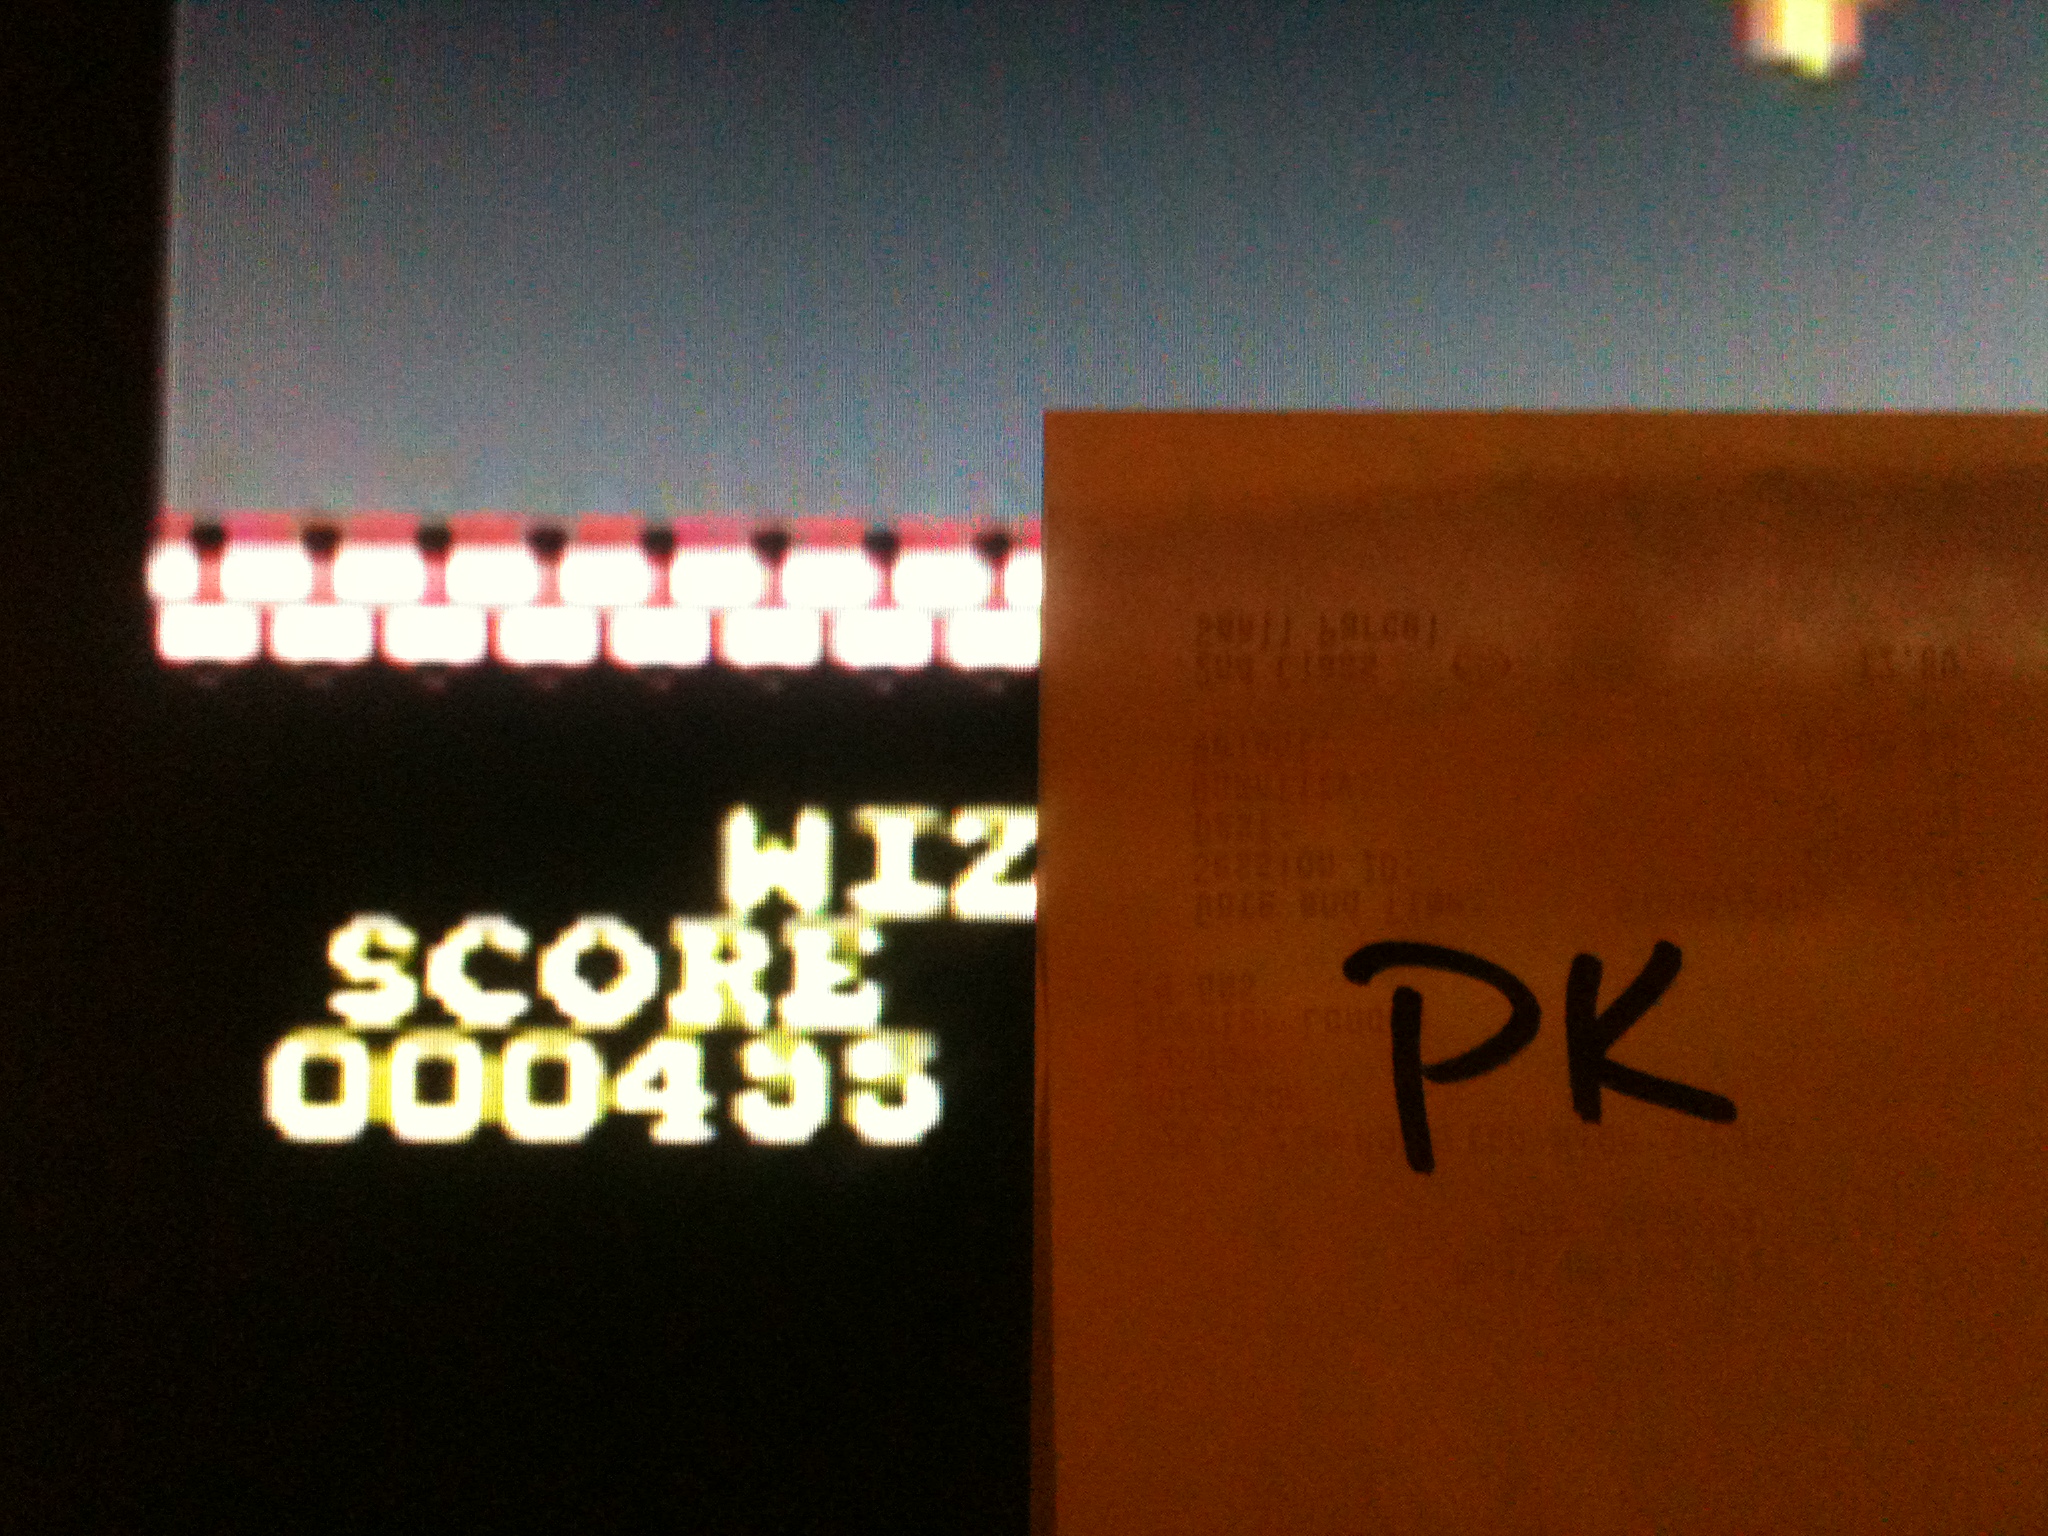 kernzy: Gauntlet (Commodore 64 Emulated) 495 points on 2015-09-22 09:19:14